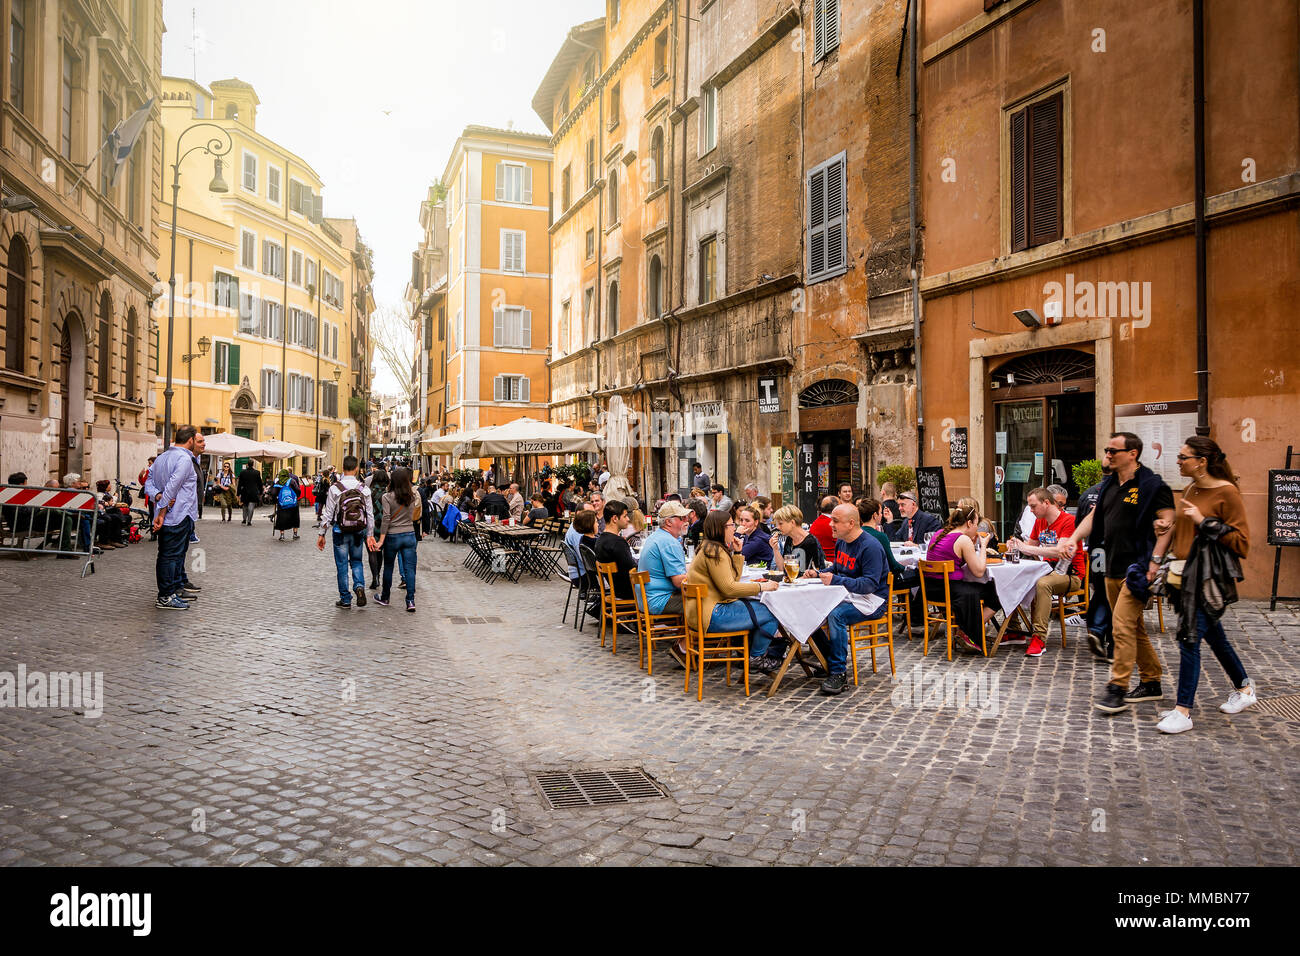 Rome, Italy, march 2017: unrecognizable people sitting in the kosher restaurant tables in the historic Jewish quarter of Rome Stock Photo